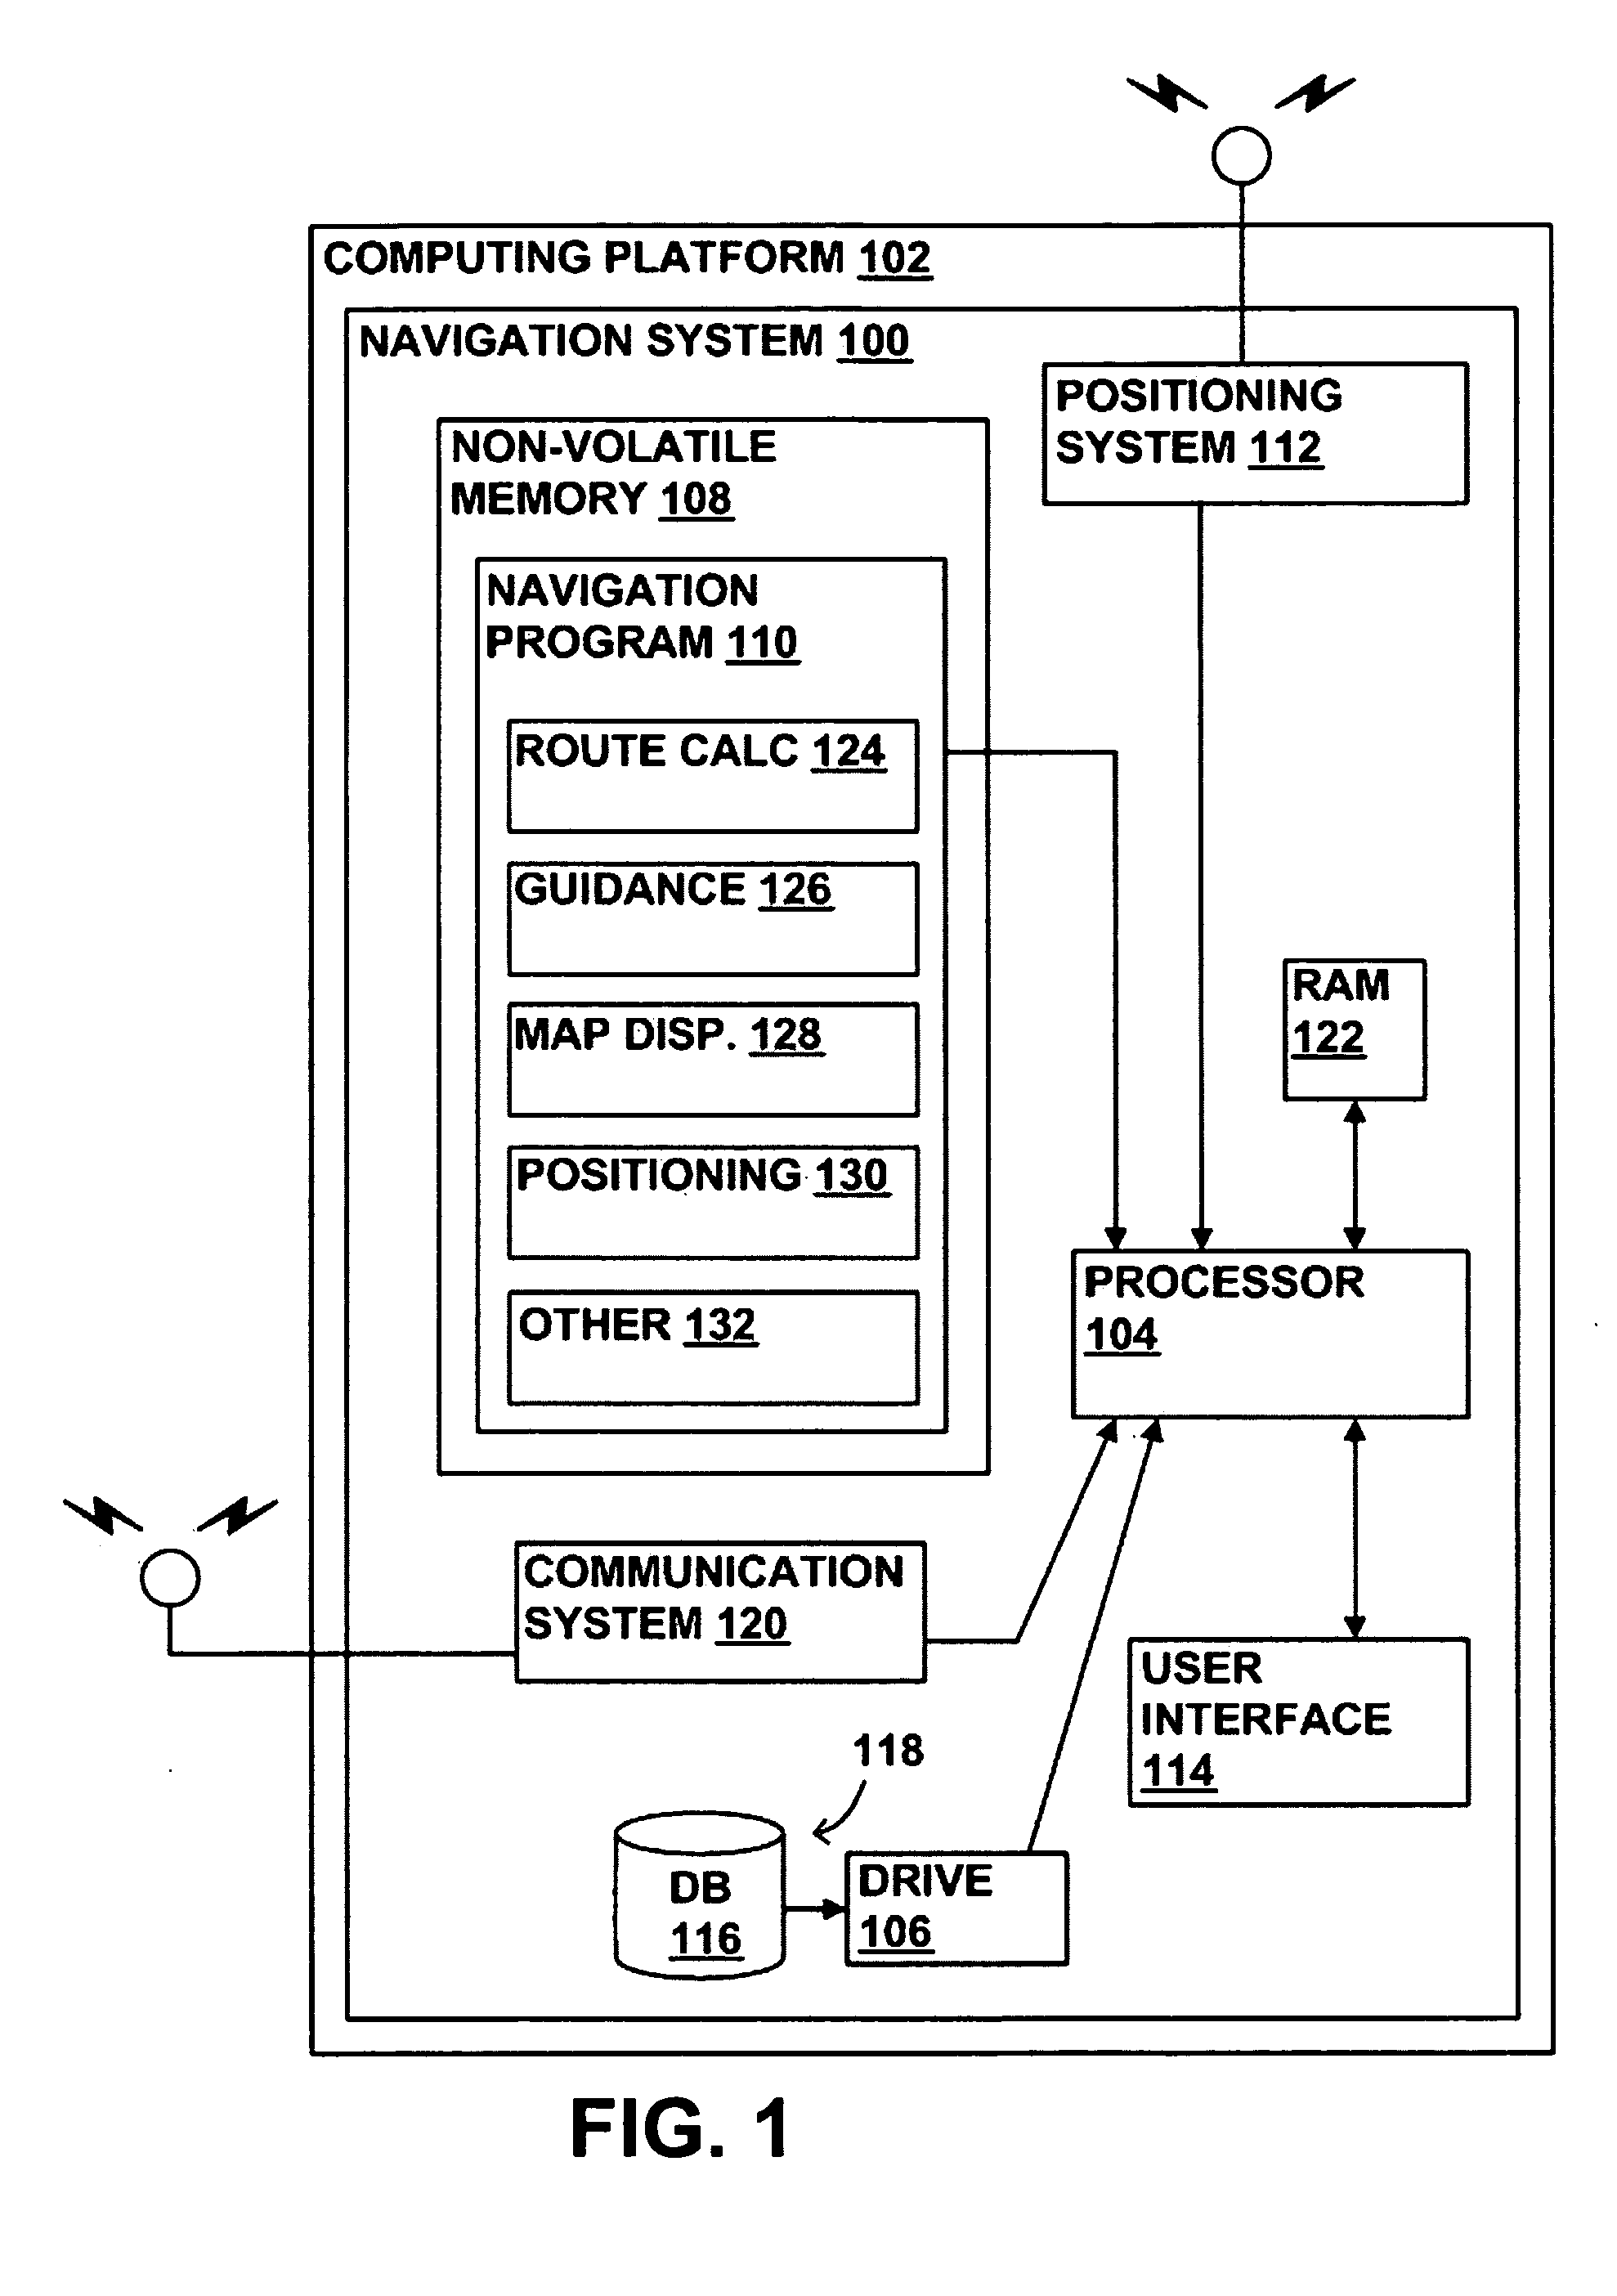 Method of collecting information for a geographic database for use with a navigation system